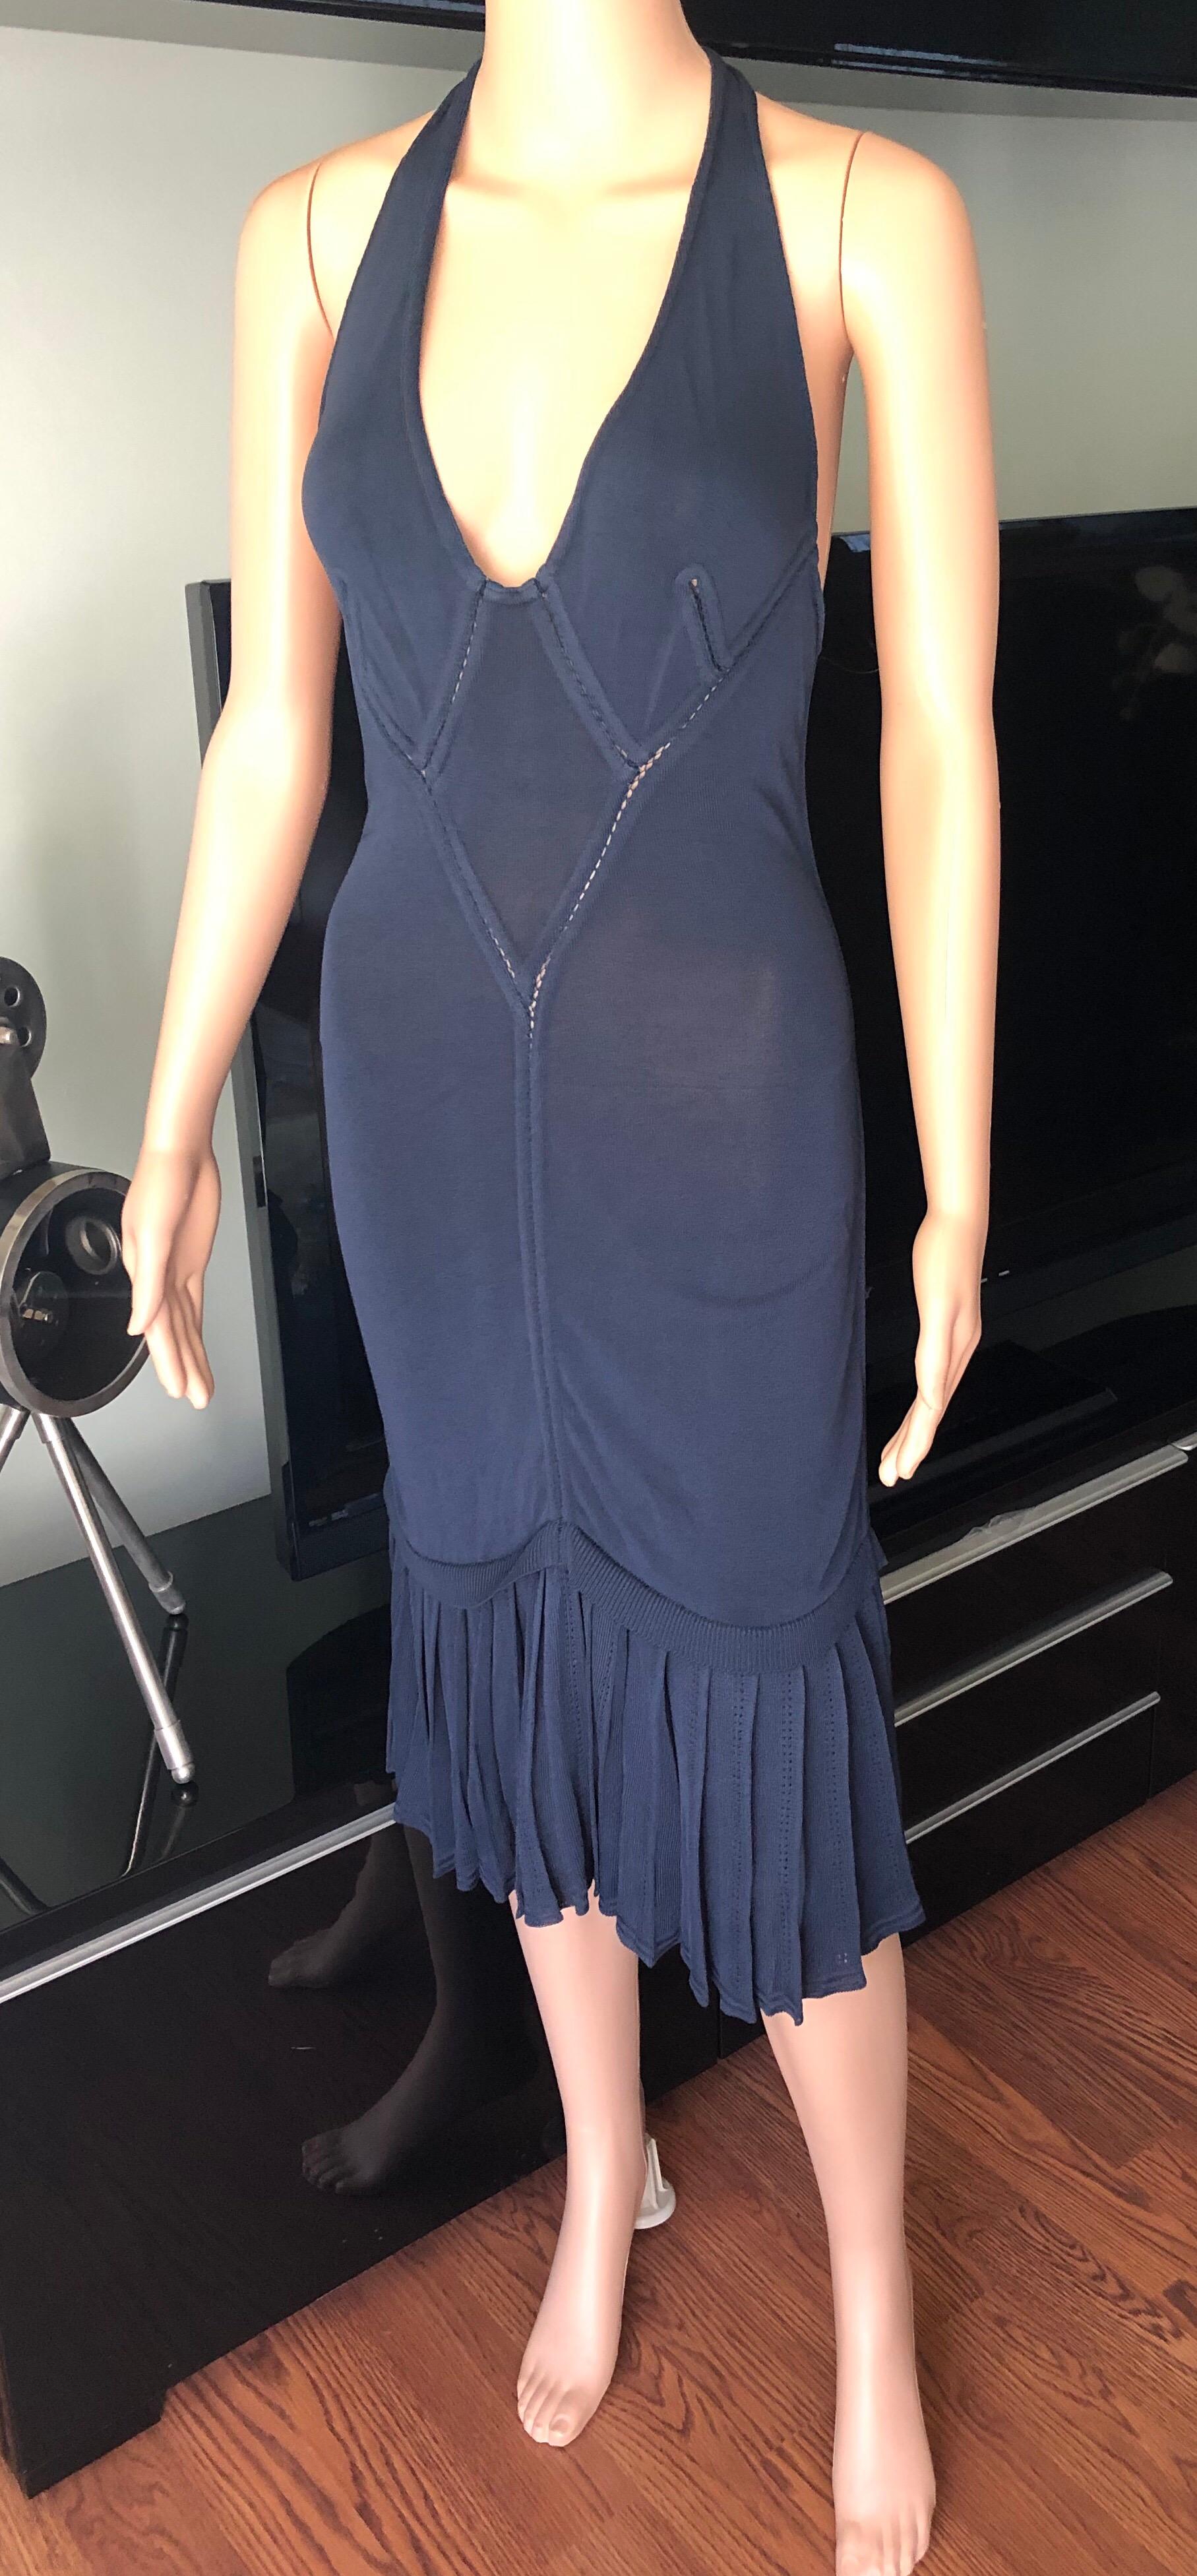 Azzedine Alaia Vintage Plunging Semi-Sheer Midi Dress Size XS

Vintage Alaia sleeveless midi dress with open knit trim throughout, plunging neckline and flared hem.